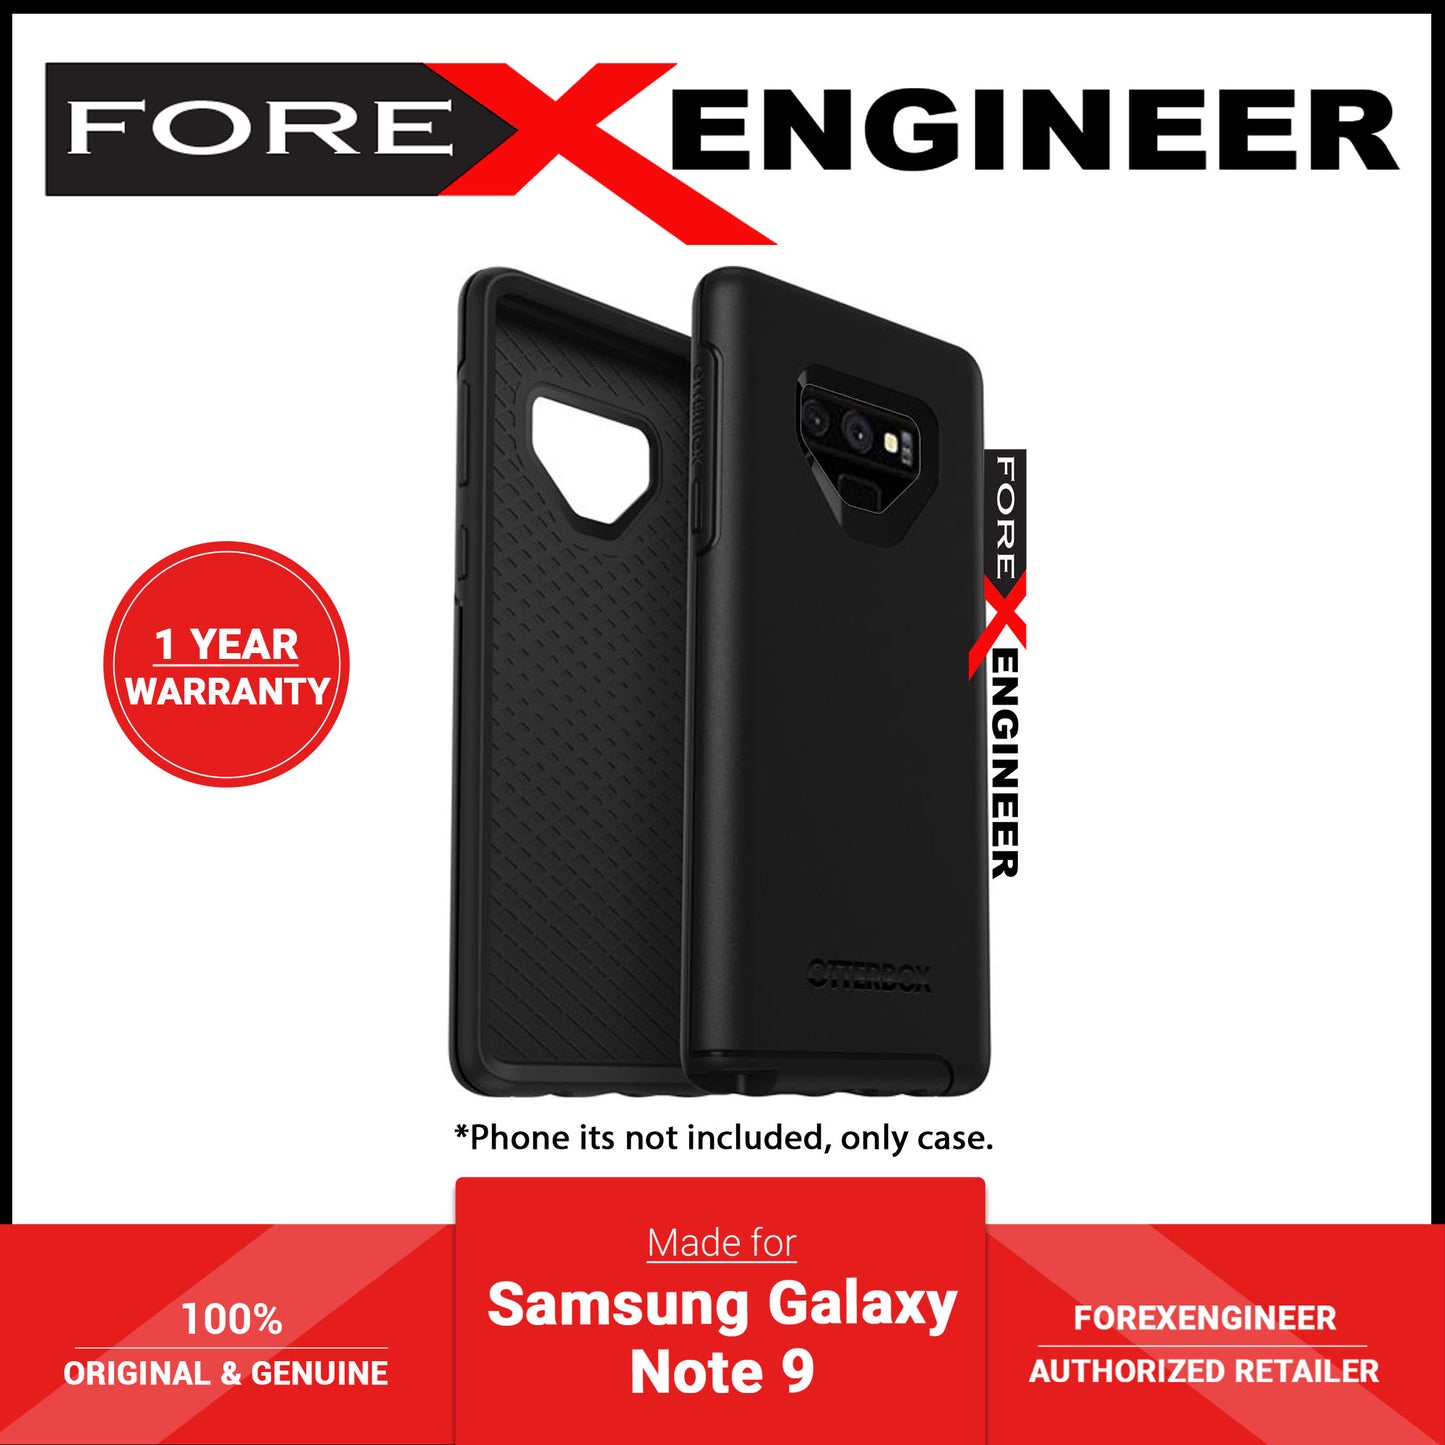 Otterbox Symmetry Case for Samsung Galaxy Note 9 - Black (Barcode: 660543462705 )